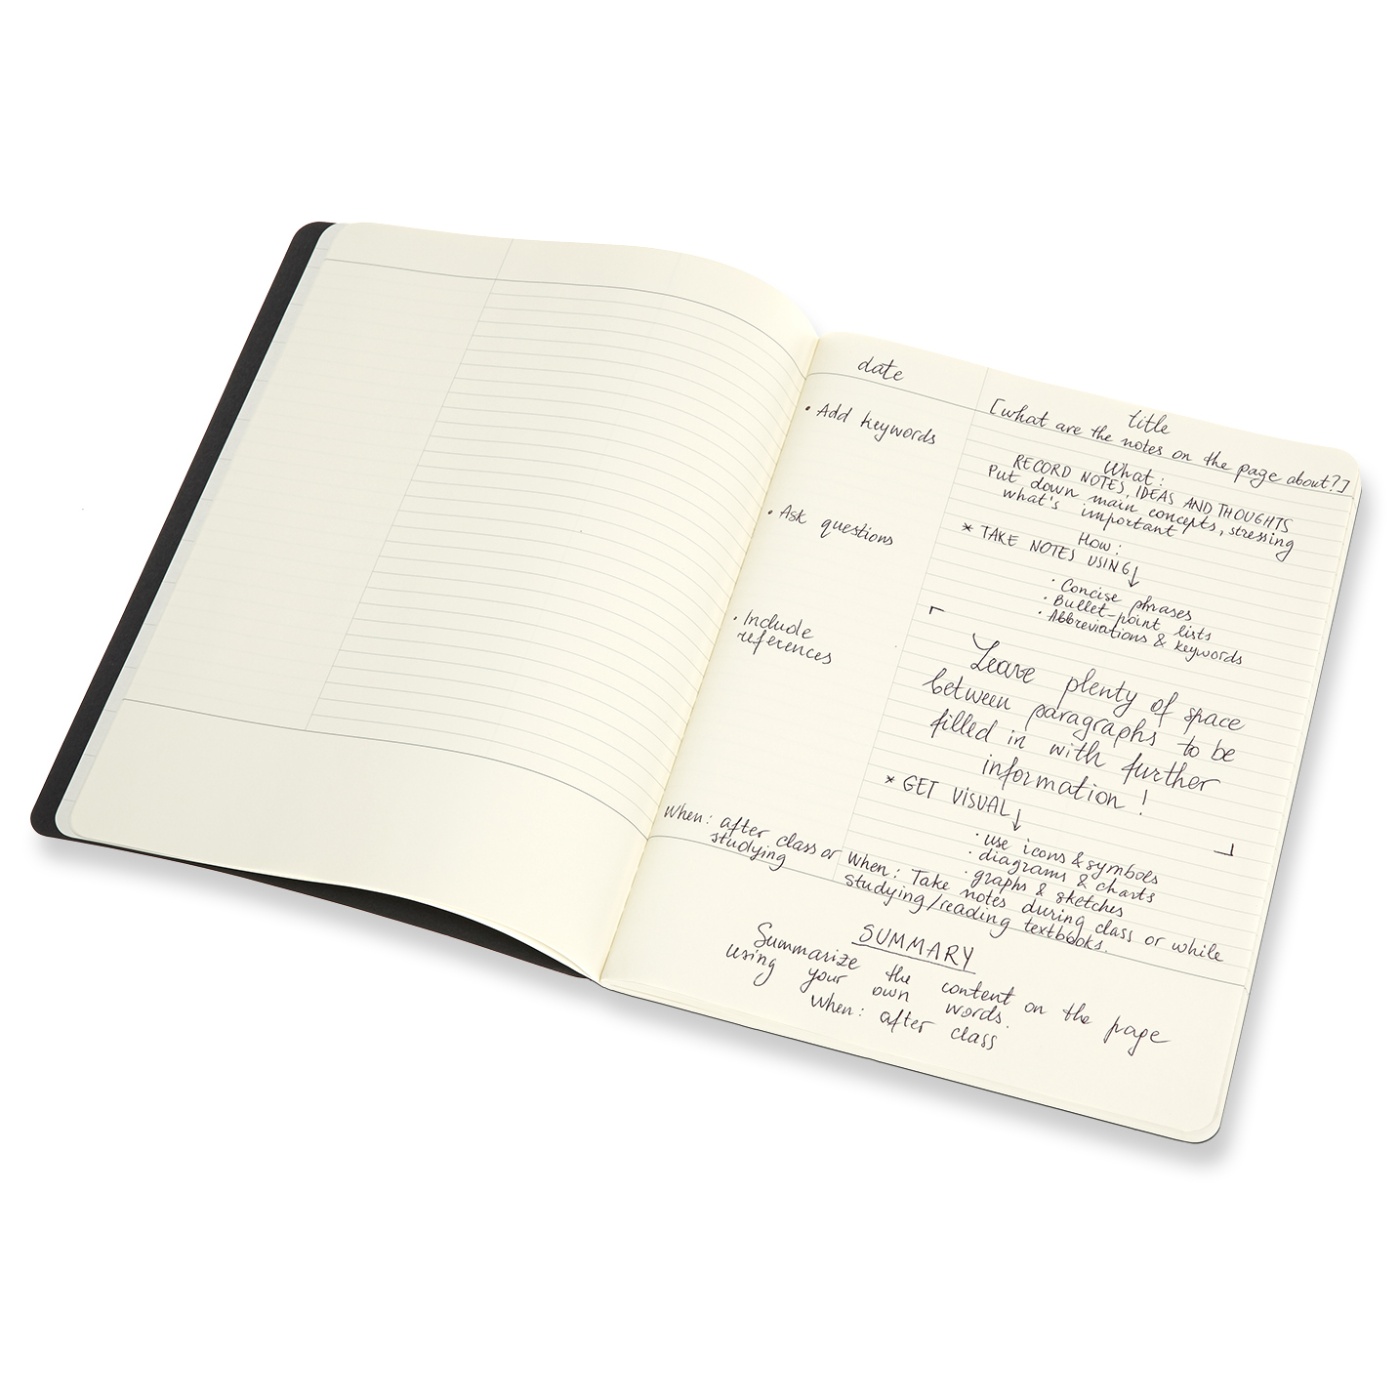 Cahier Subject A4 Black/Red Ruled in the group Paper & Pads / Note & Memo / Writing & Memo Pads at Pen Store (100337)